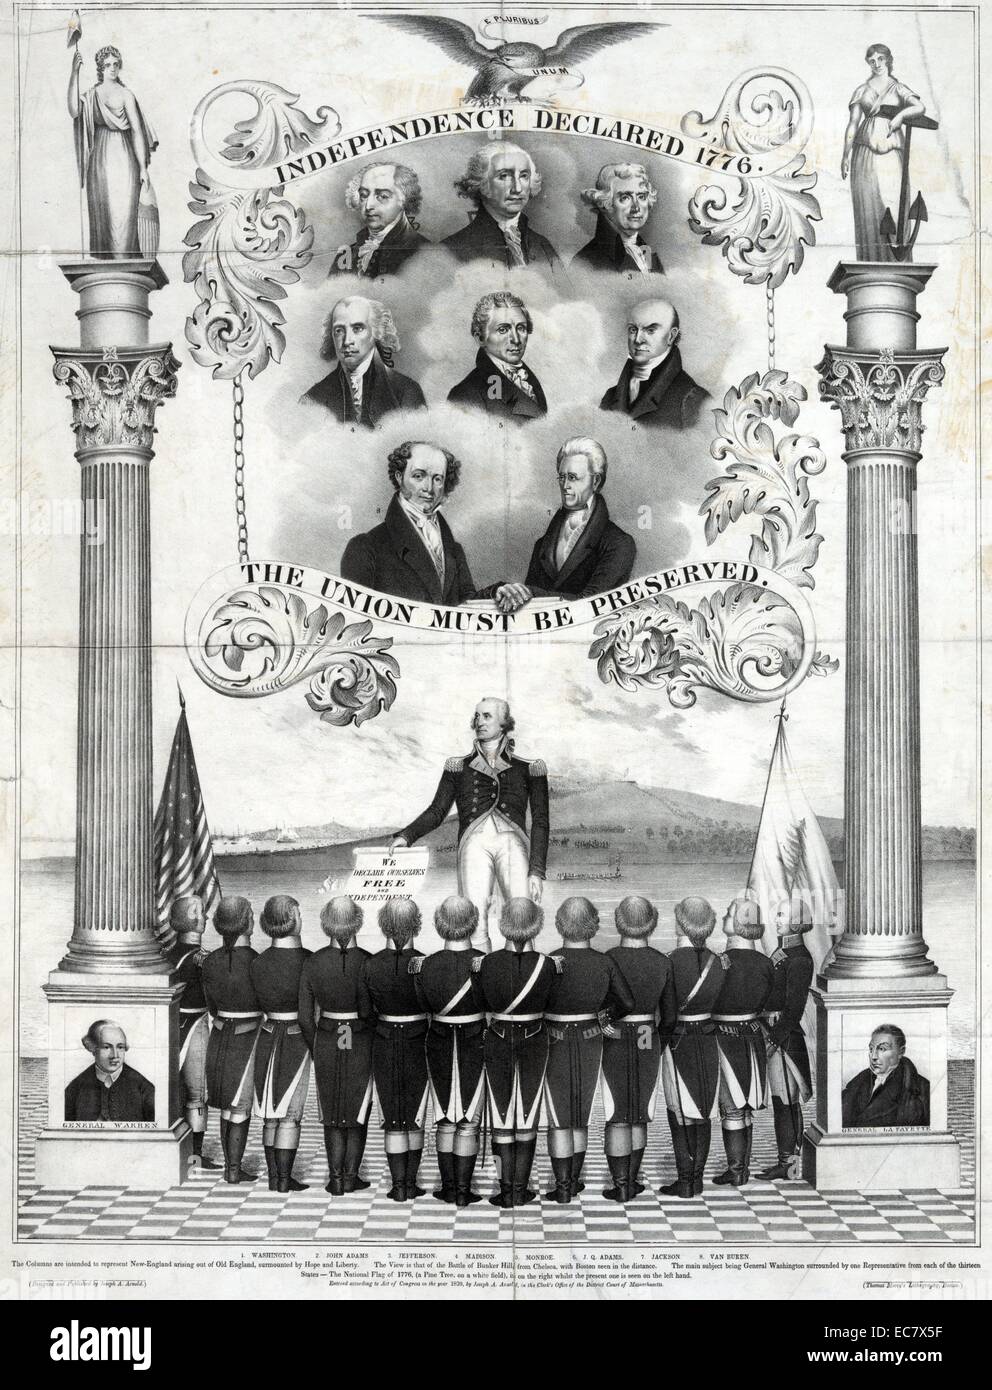 Independence declared 1776. The Union must be preserved' A memorial to the Declaration of Independence and the American Revolution, with distinctly pro-Democratic overtones. Below the title 'Independence Declared' are bust portraits of the first eight Presidents, with Jackson and Van Buren joining hands. Beneath them is a scroll with Andrew Jackson's famous toast, 'The Union Must be Preserved.' Below stands George Washington, in uniform and holding a scroll inscribed 'We declare ourselves free and independent.' Stock Photo